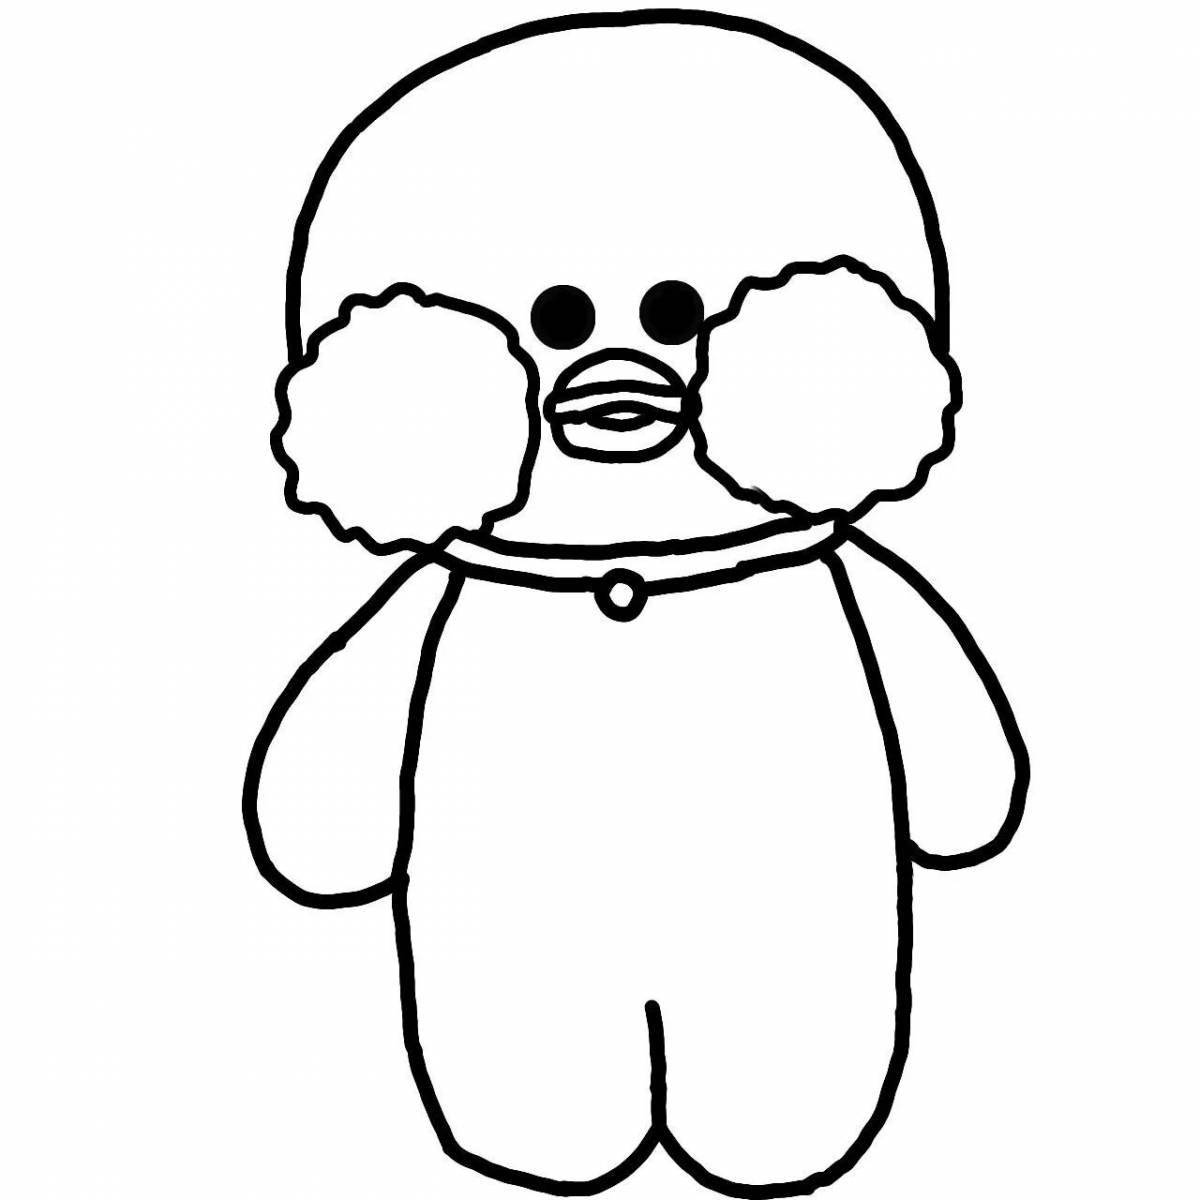 Lalofan playful duck coloring page